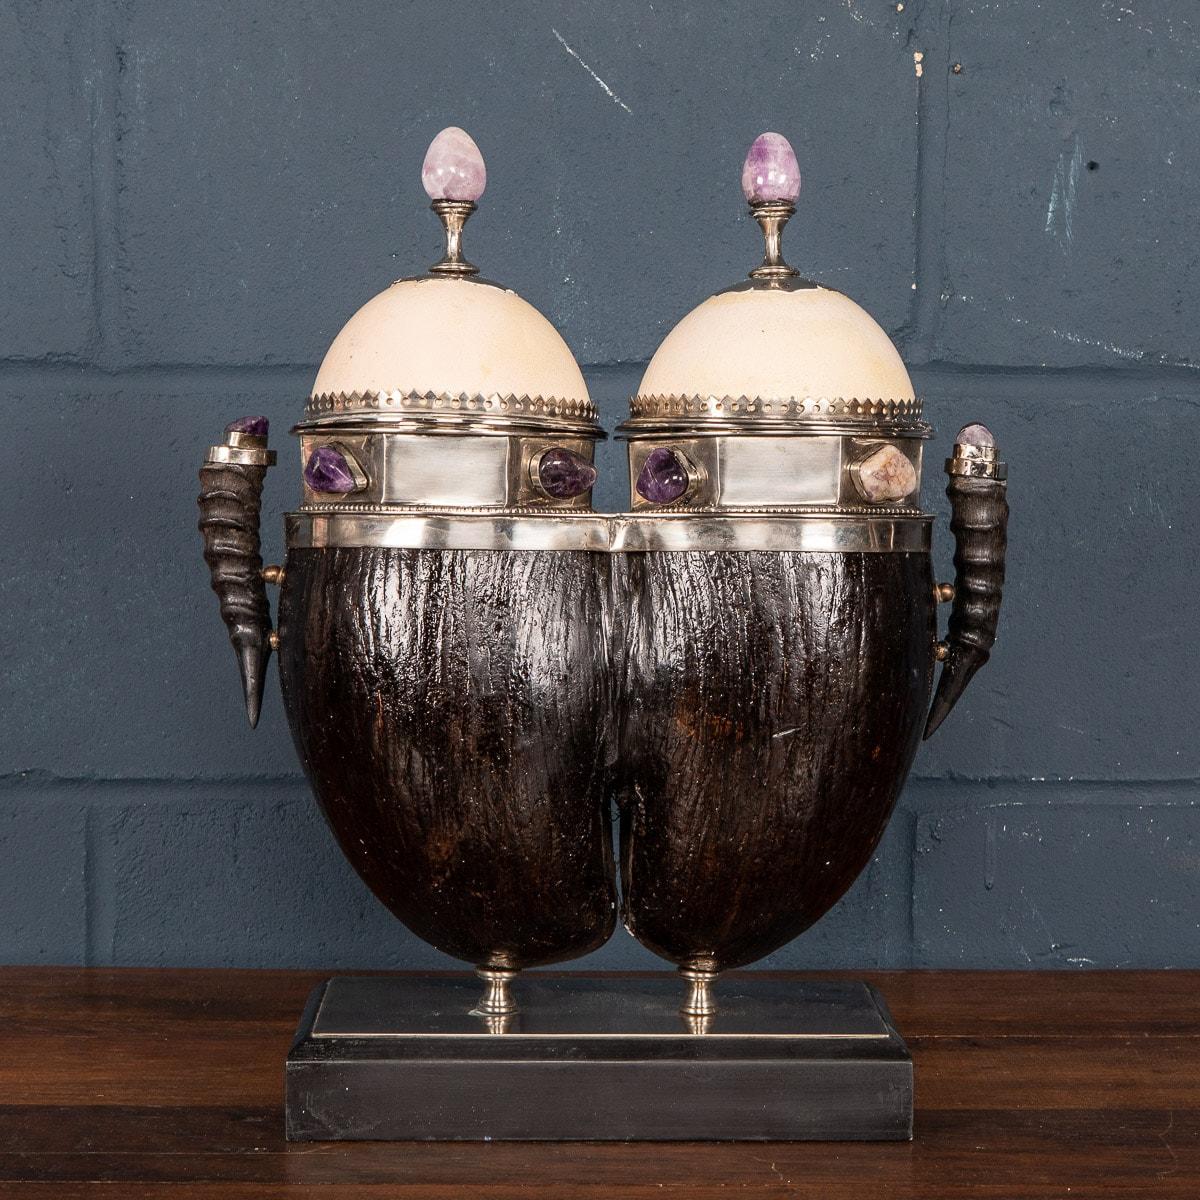 An extremely rare and unusual coco de mer box made in the 1970s by Anthony Redmile. Silvered mounts, ostrich egg lids, embellished with malachite, cabochons and finials, flanked by two African antelope horn handles, this item exemplifies Redmile’s